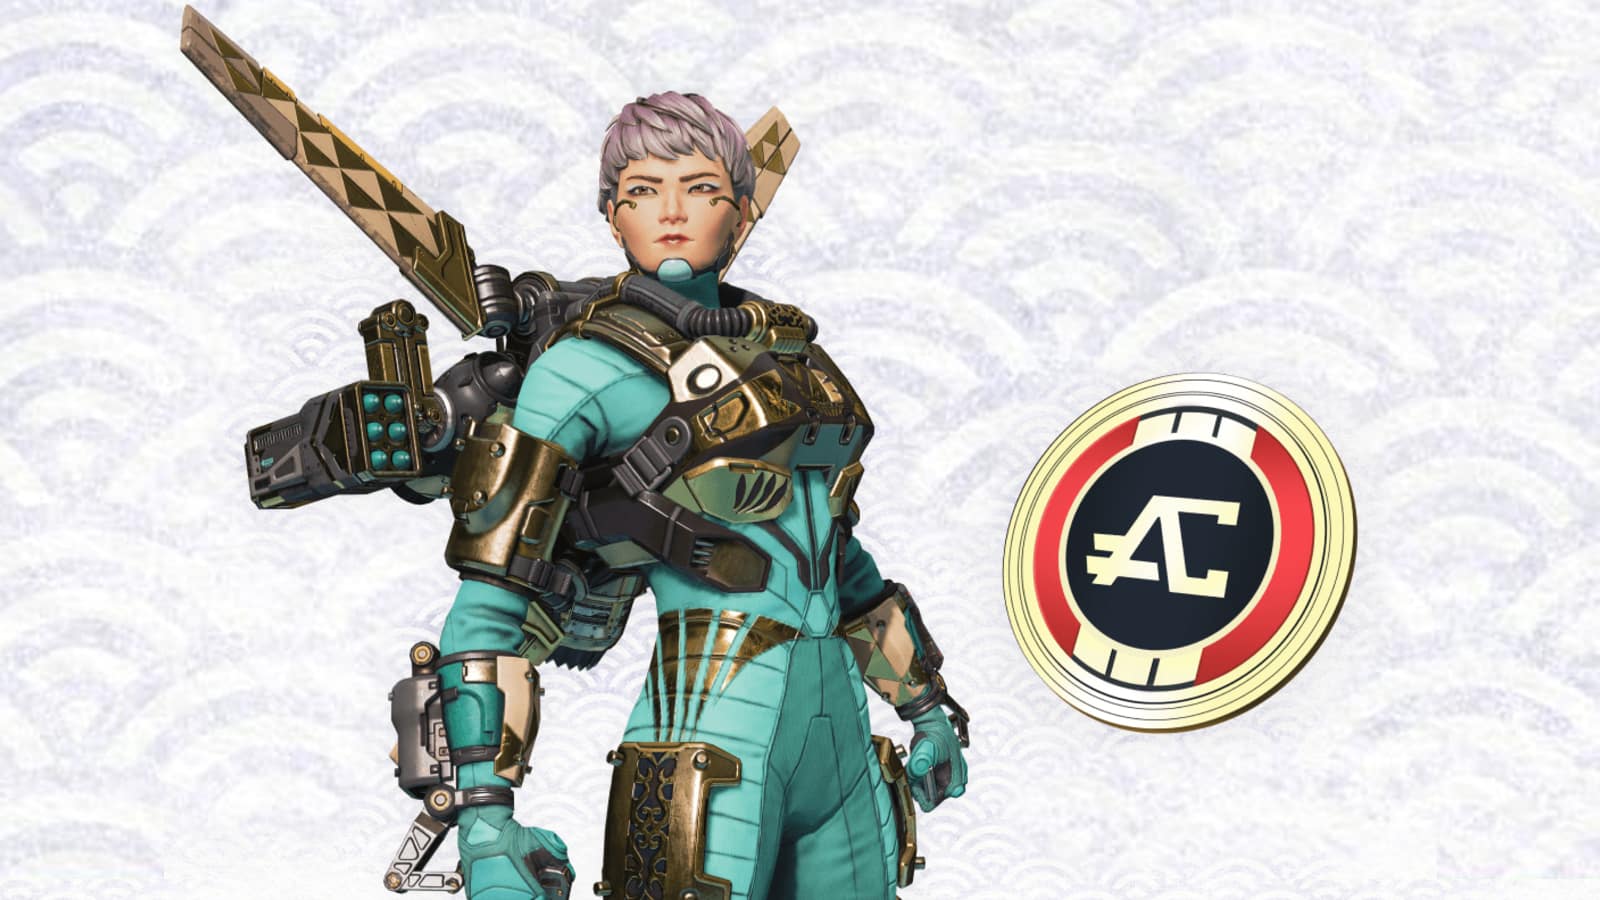 Valkyrie Legacy Pack skin for Apex Legends